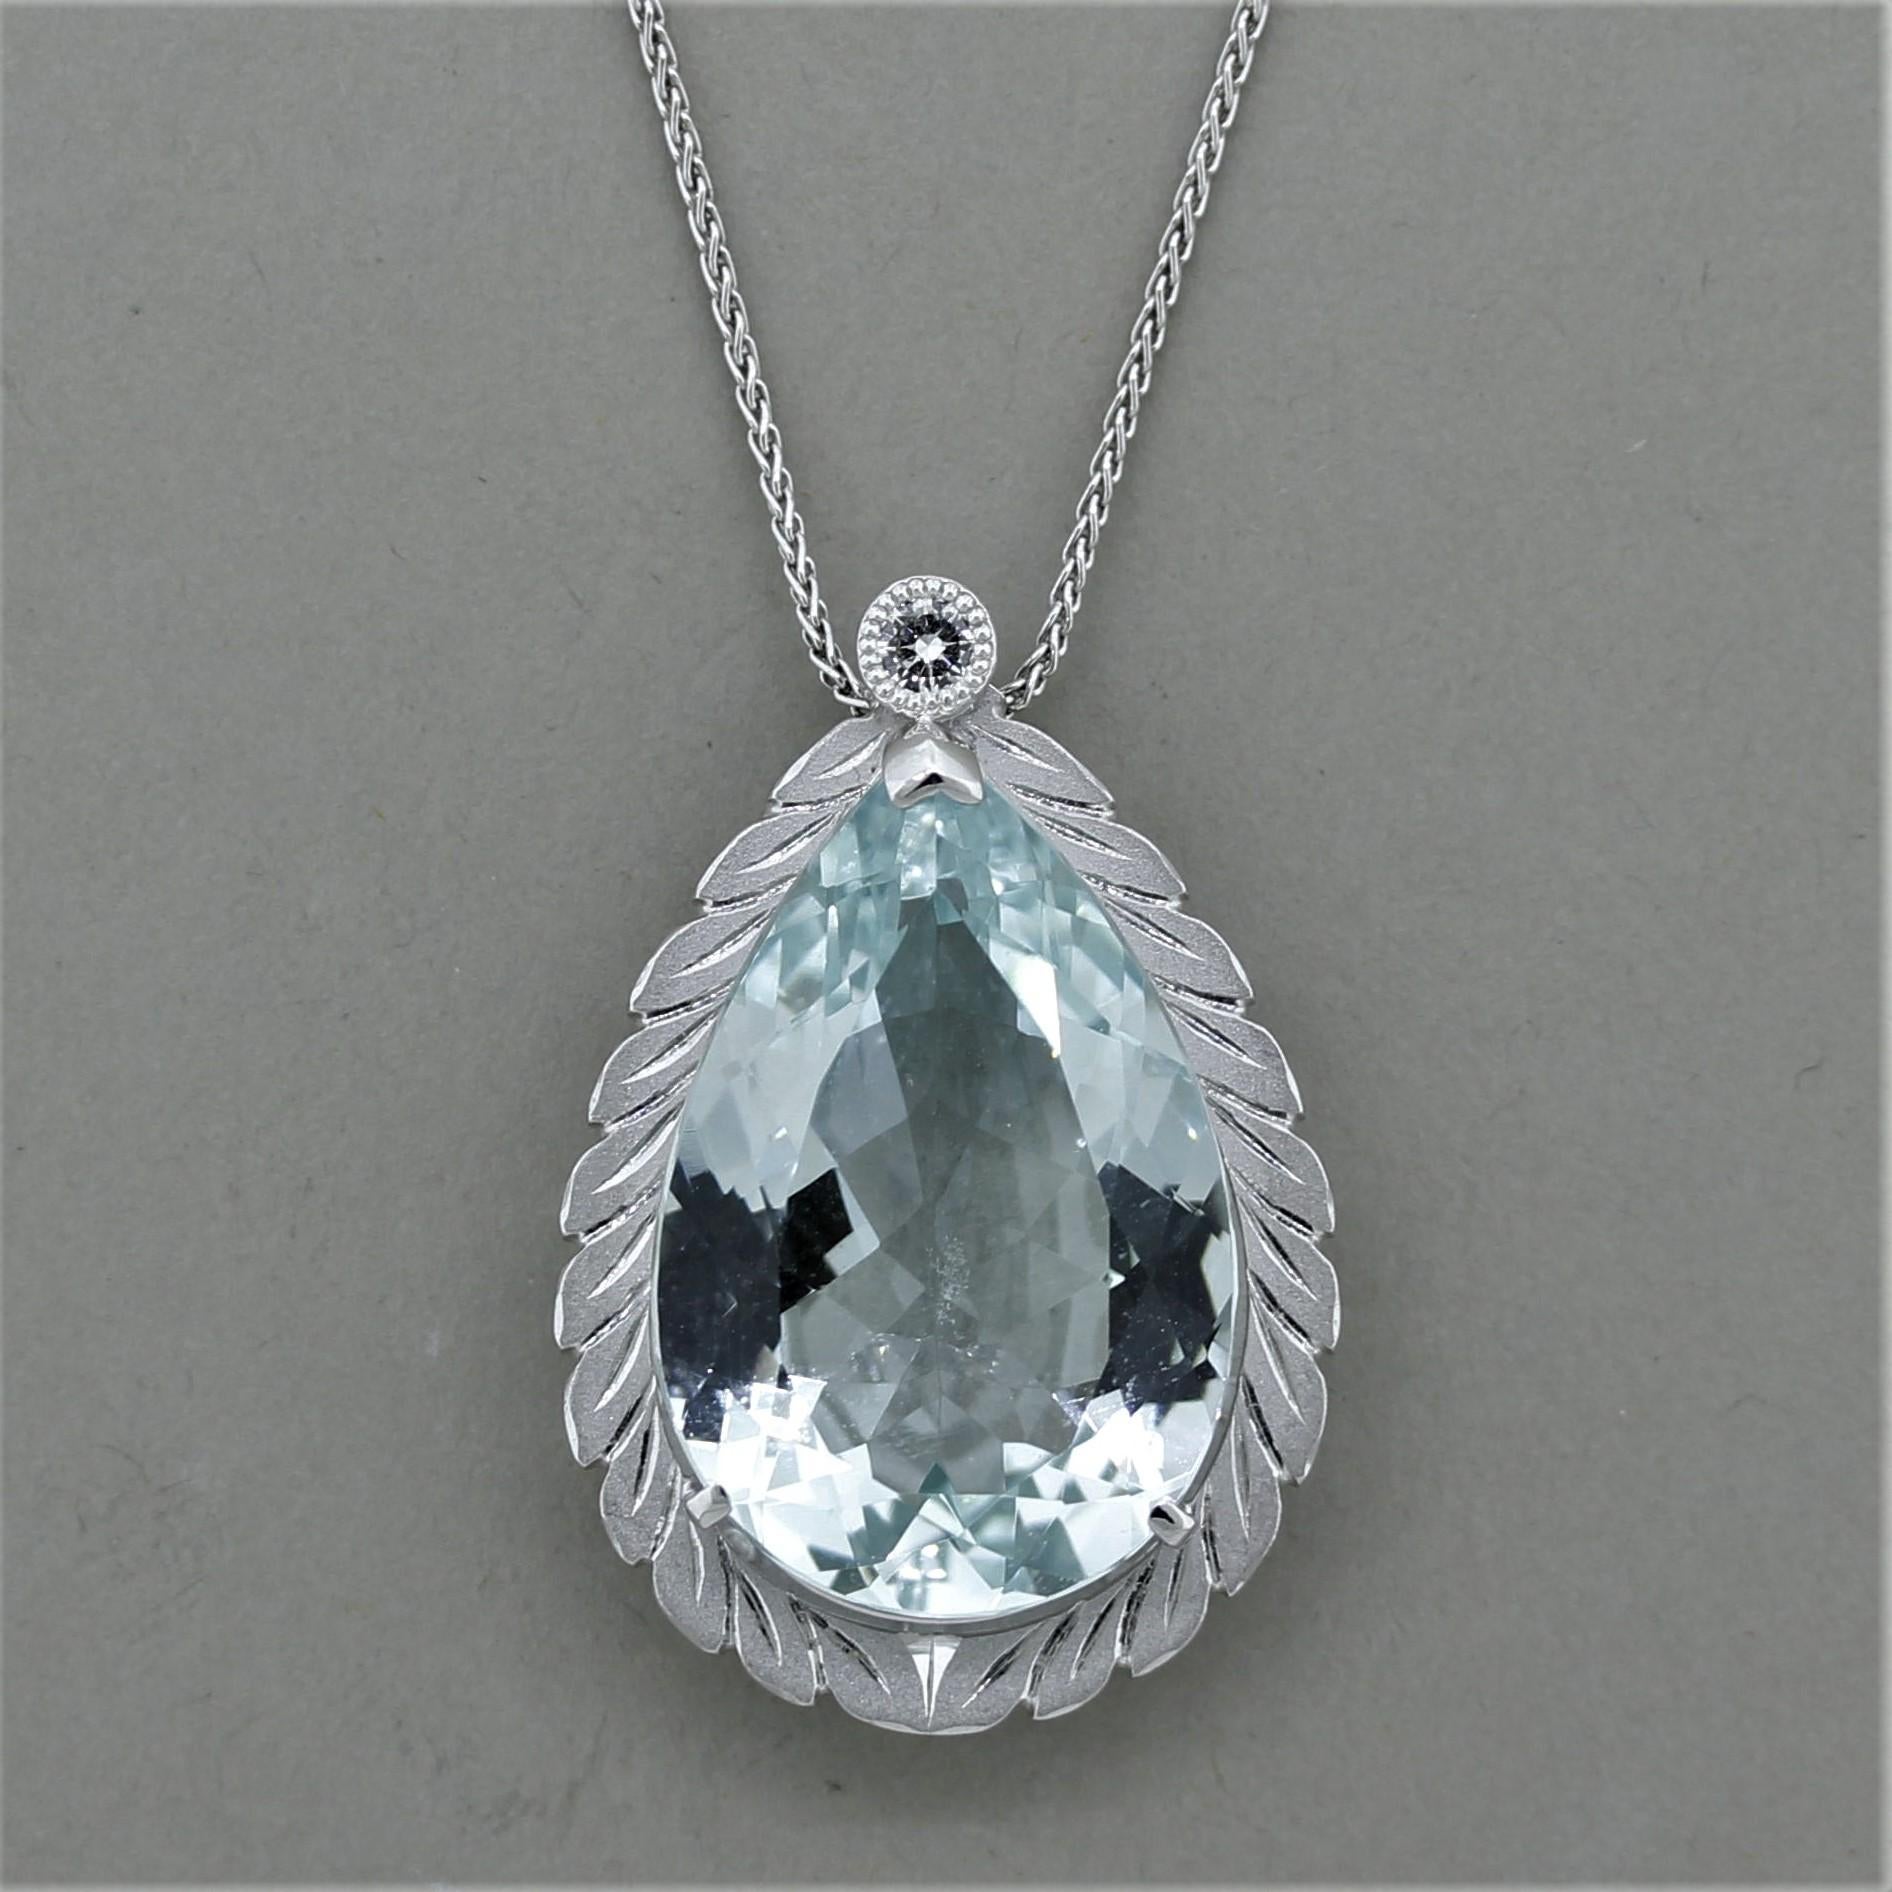 A lovely pendant featuring a 32.85 carat pear-shaped aquamarine! It has a classic sea-blue color and is free from any eye-visible inclusions. It is accented by a round brilliant-cut diamond set above it and weighing 0.17 carats. Hand-fabricated in